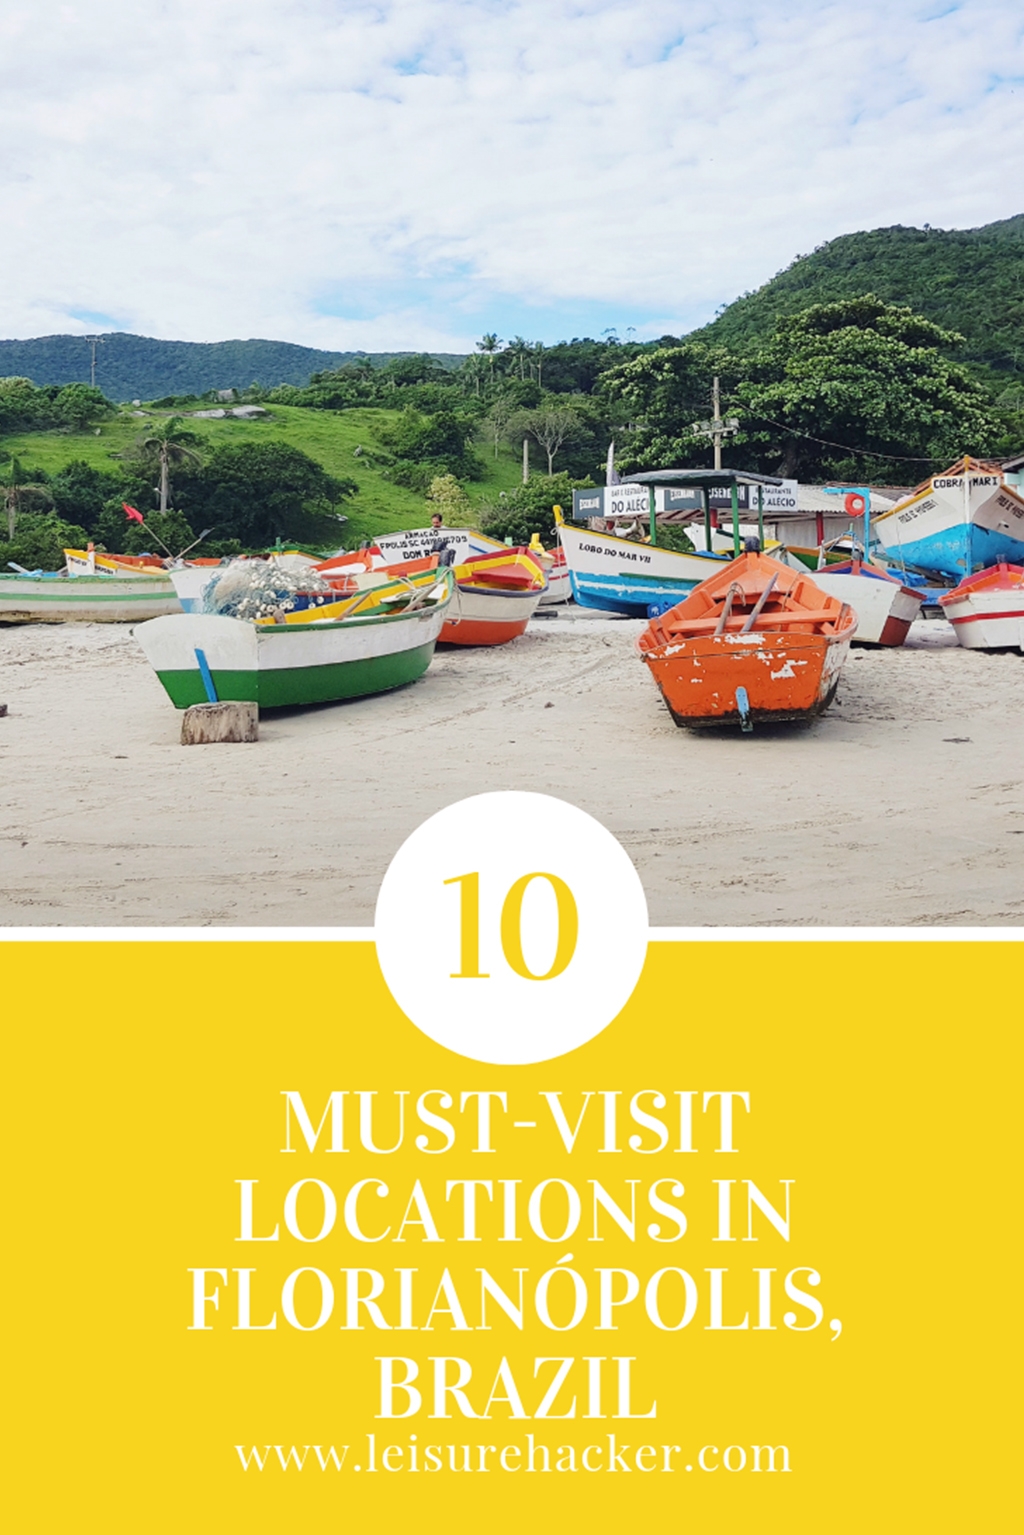 10 must-visit locations in Florianópolis Brazil